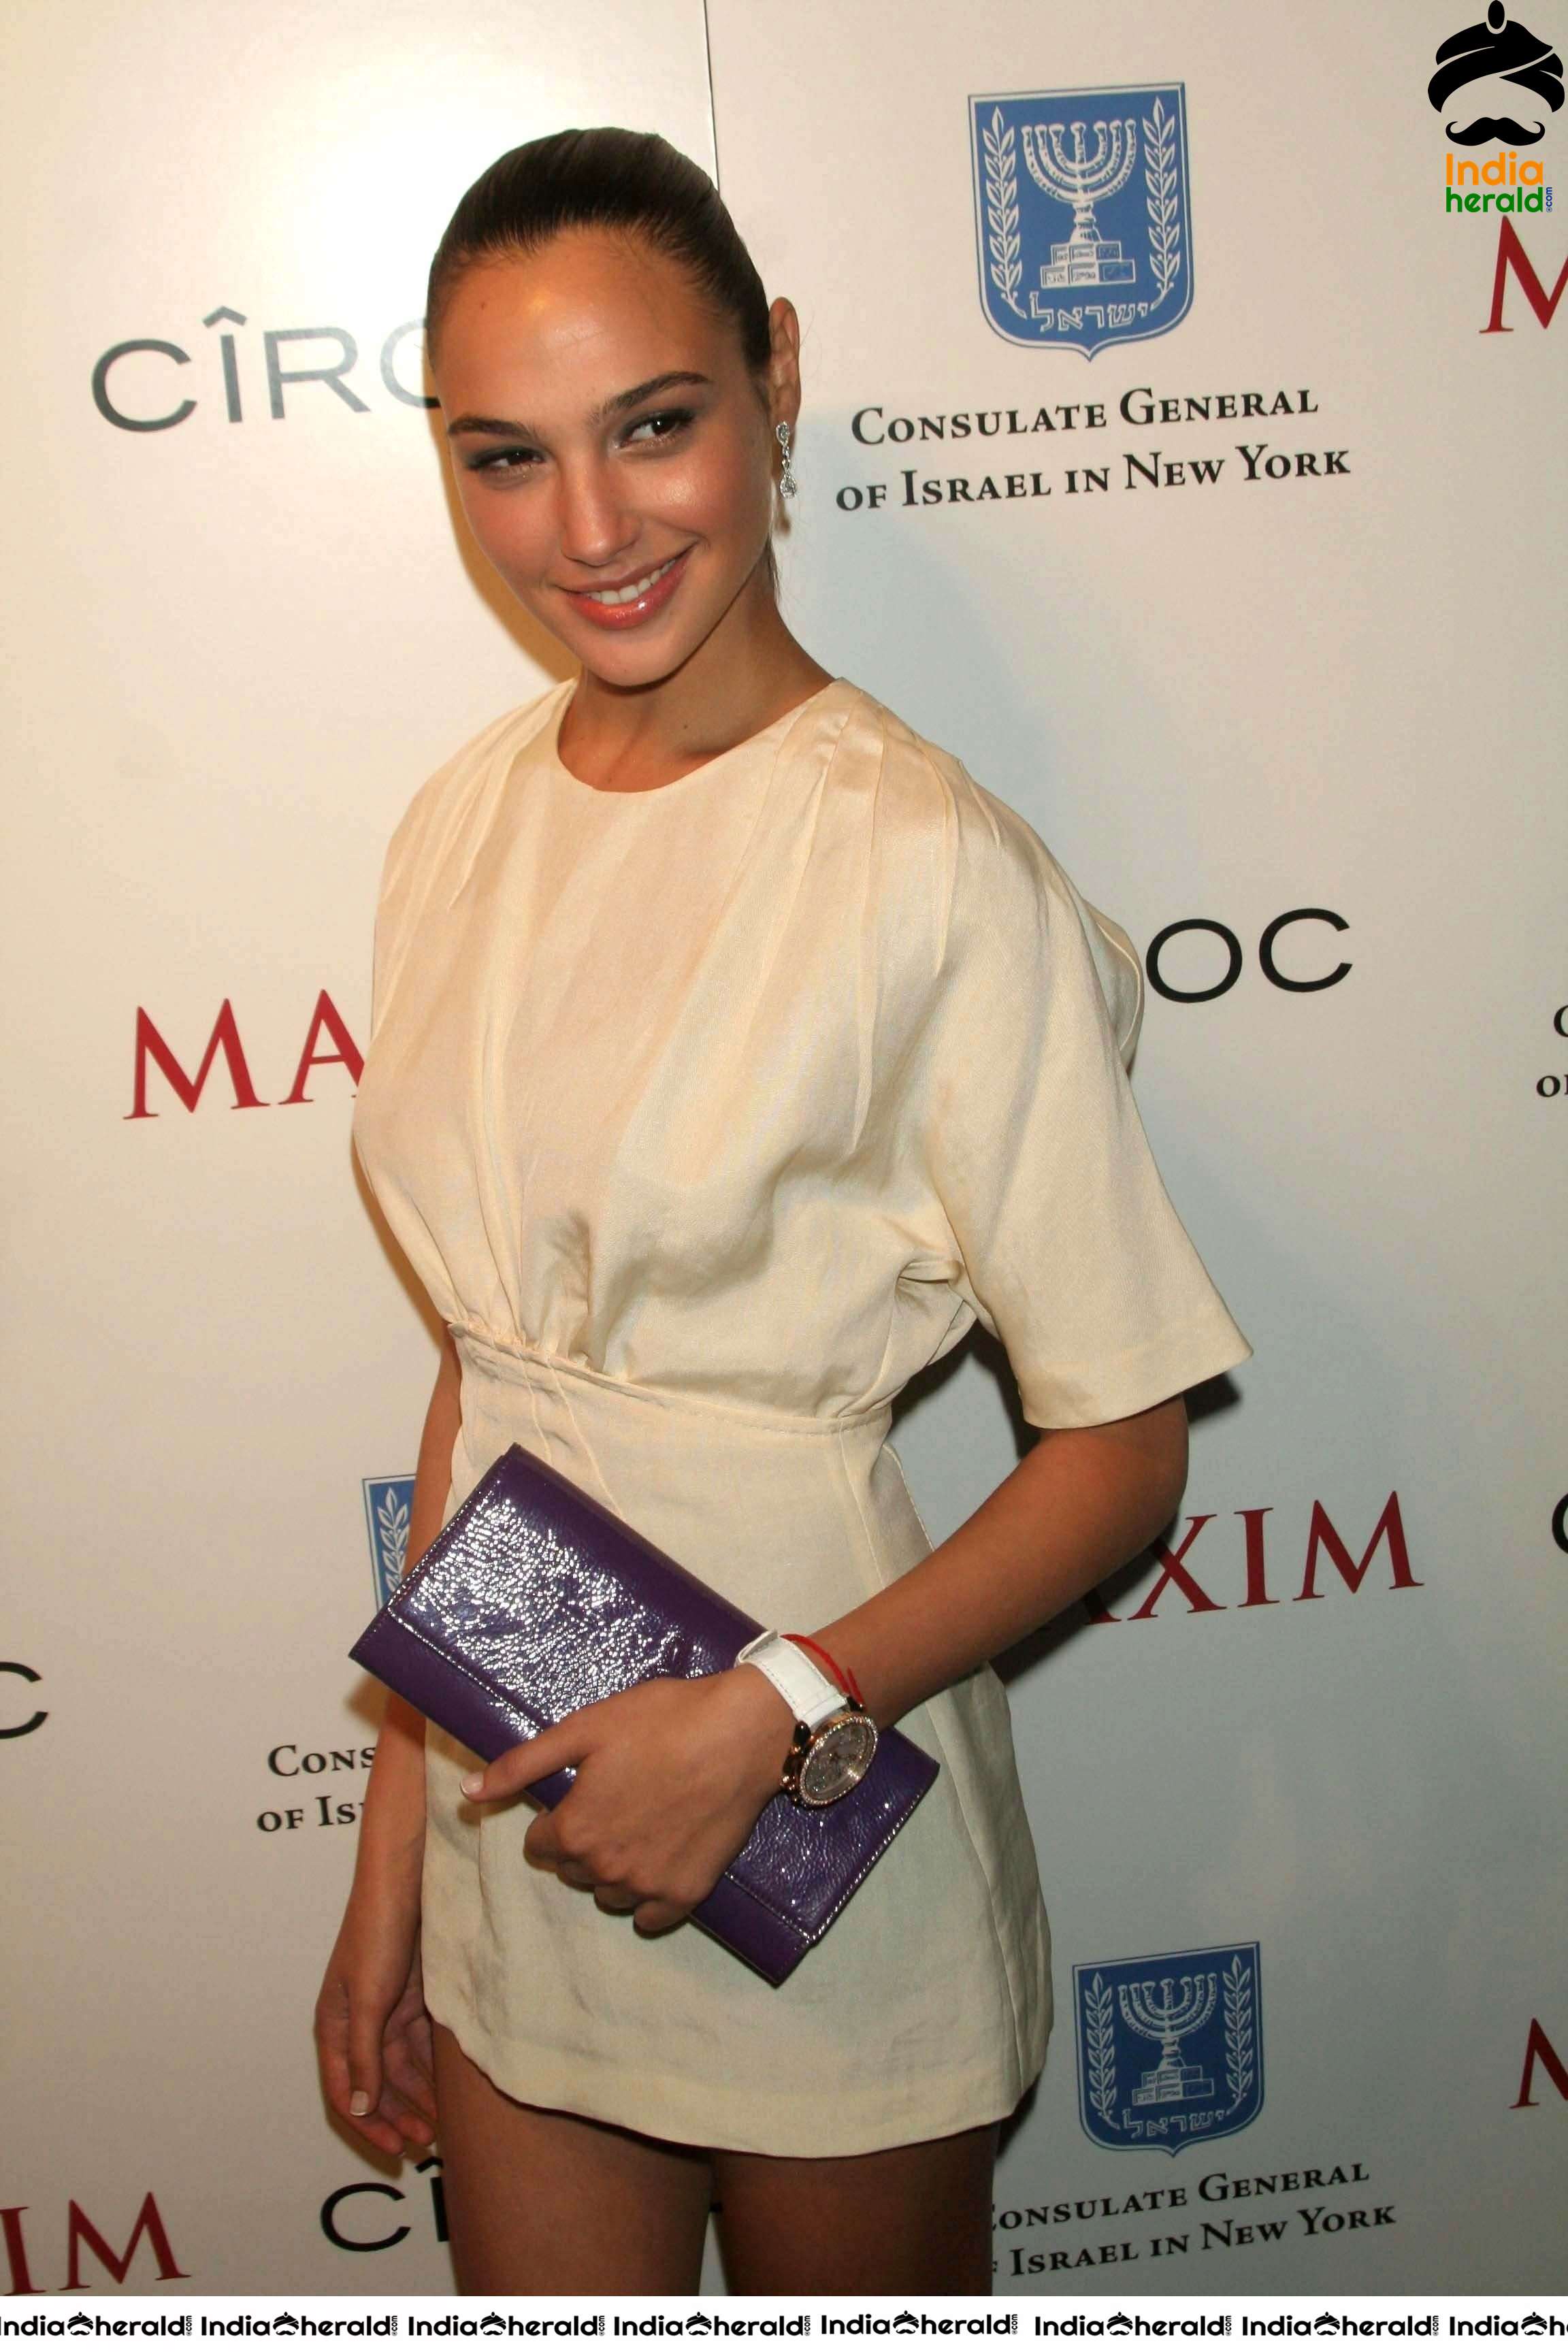 Gal Gadot at Maxim Celebrates Israel Women of Defense Forces in NYC Set 2